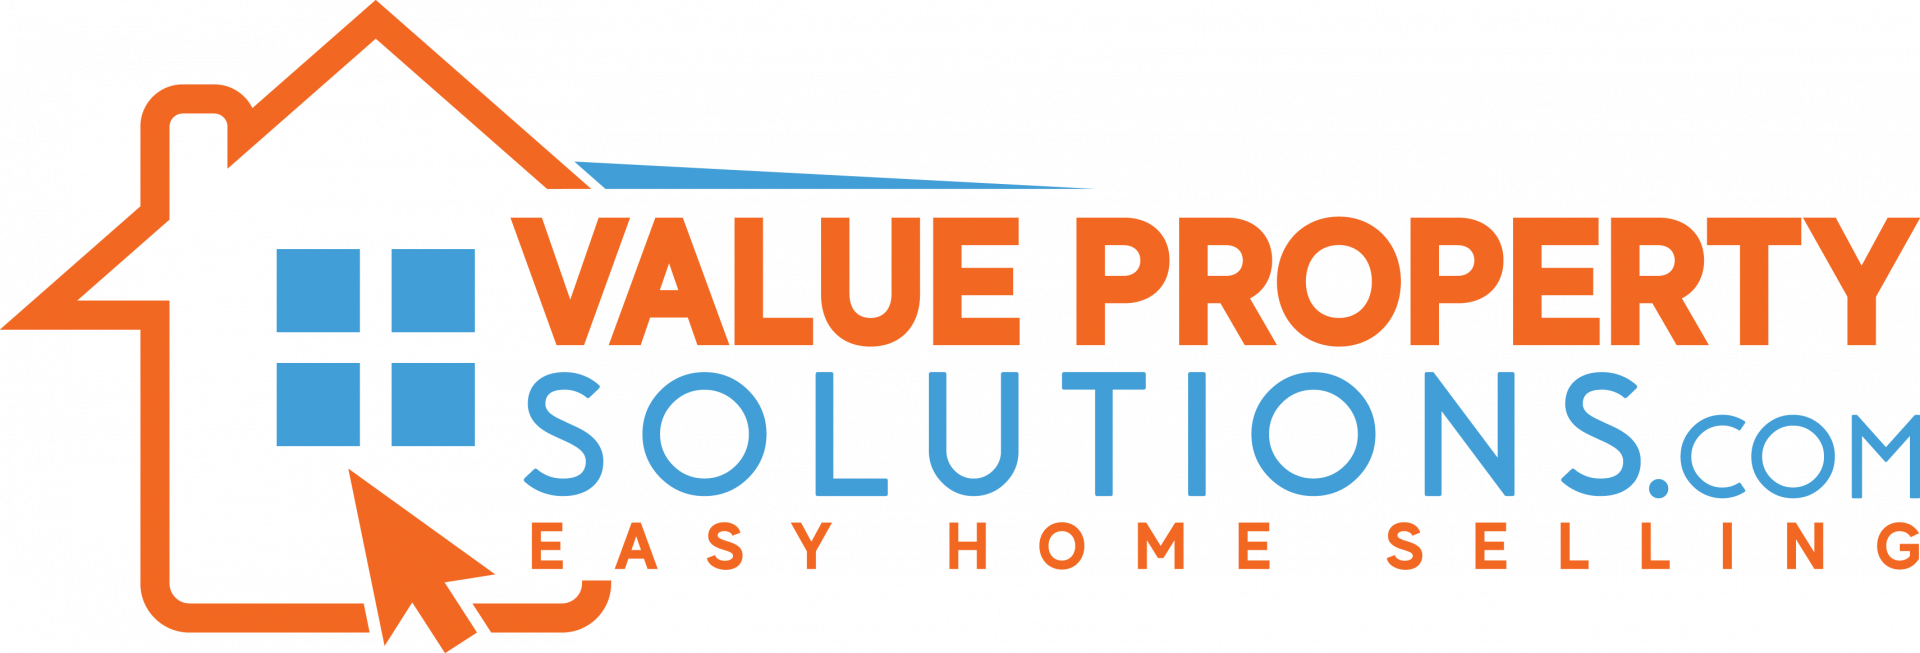 VALUE PROPERTY SOLUTIONS